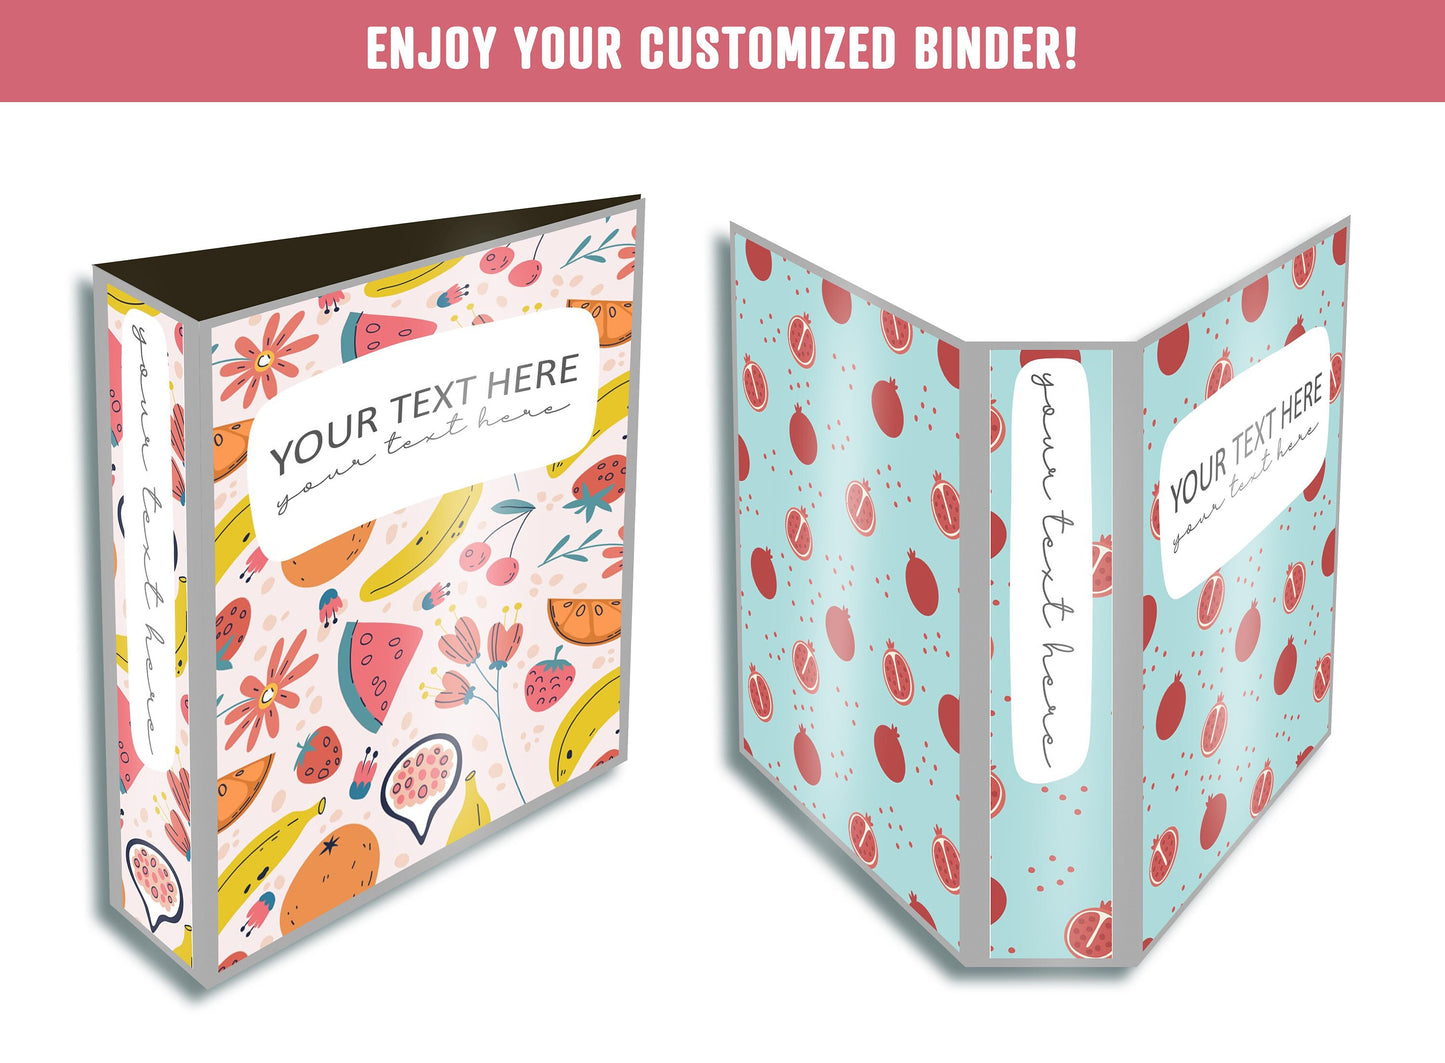 PowerPoint Binder Covers, 10 Printable/Editable Fruit Binder Covers+Spines, Binder/Planner Inserts for Teacher, Student, Home School